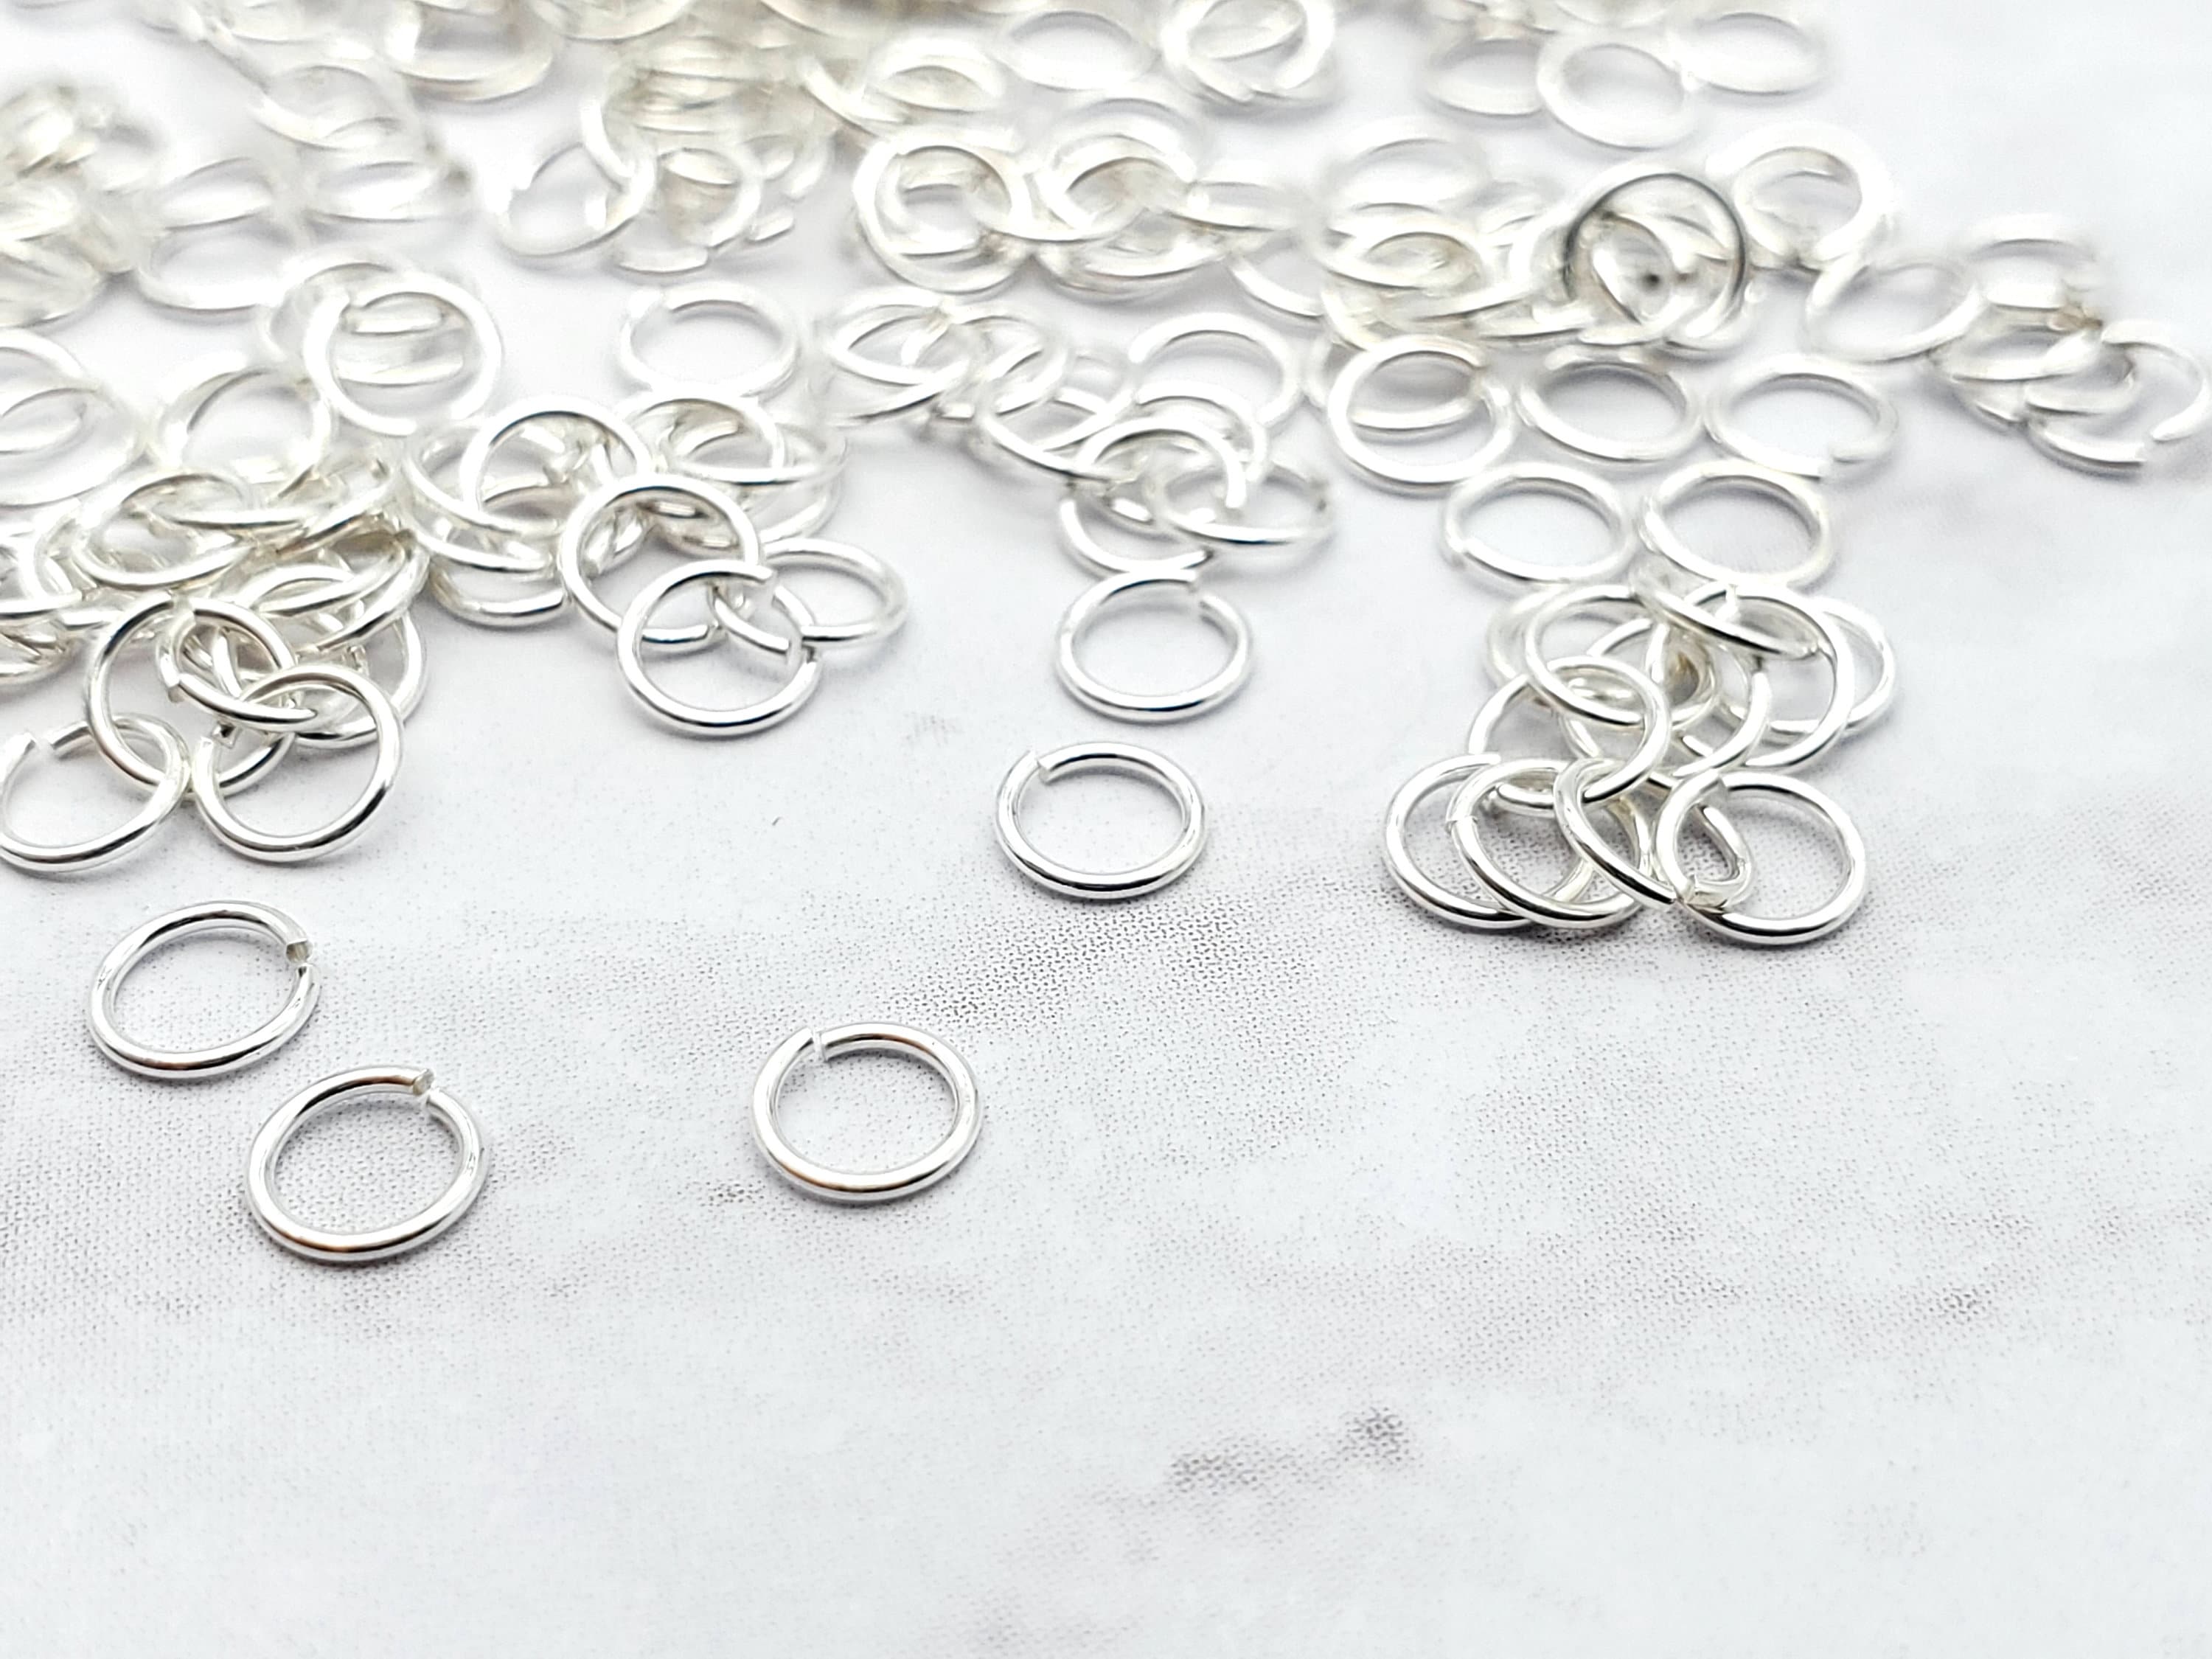 Craftdady 50pcs 4mm Soldered Jump Rings 925 Sterling Silver Closed O Rings  for Jewelry Crafts Making